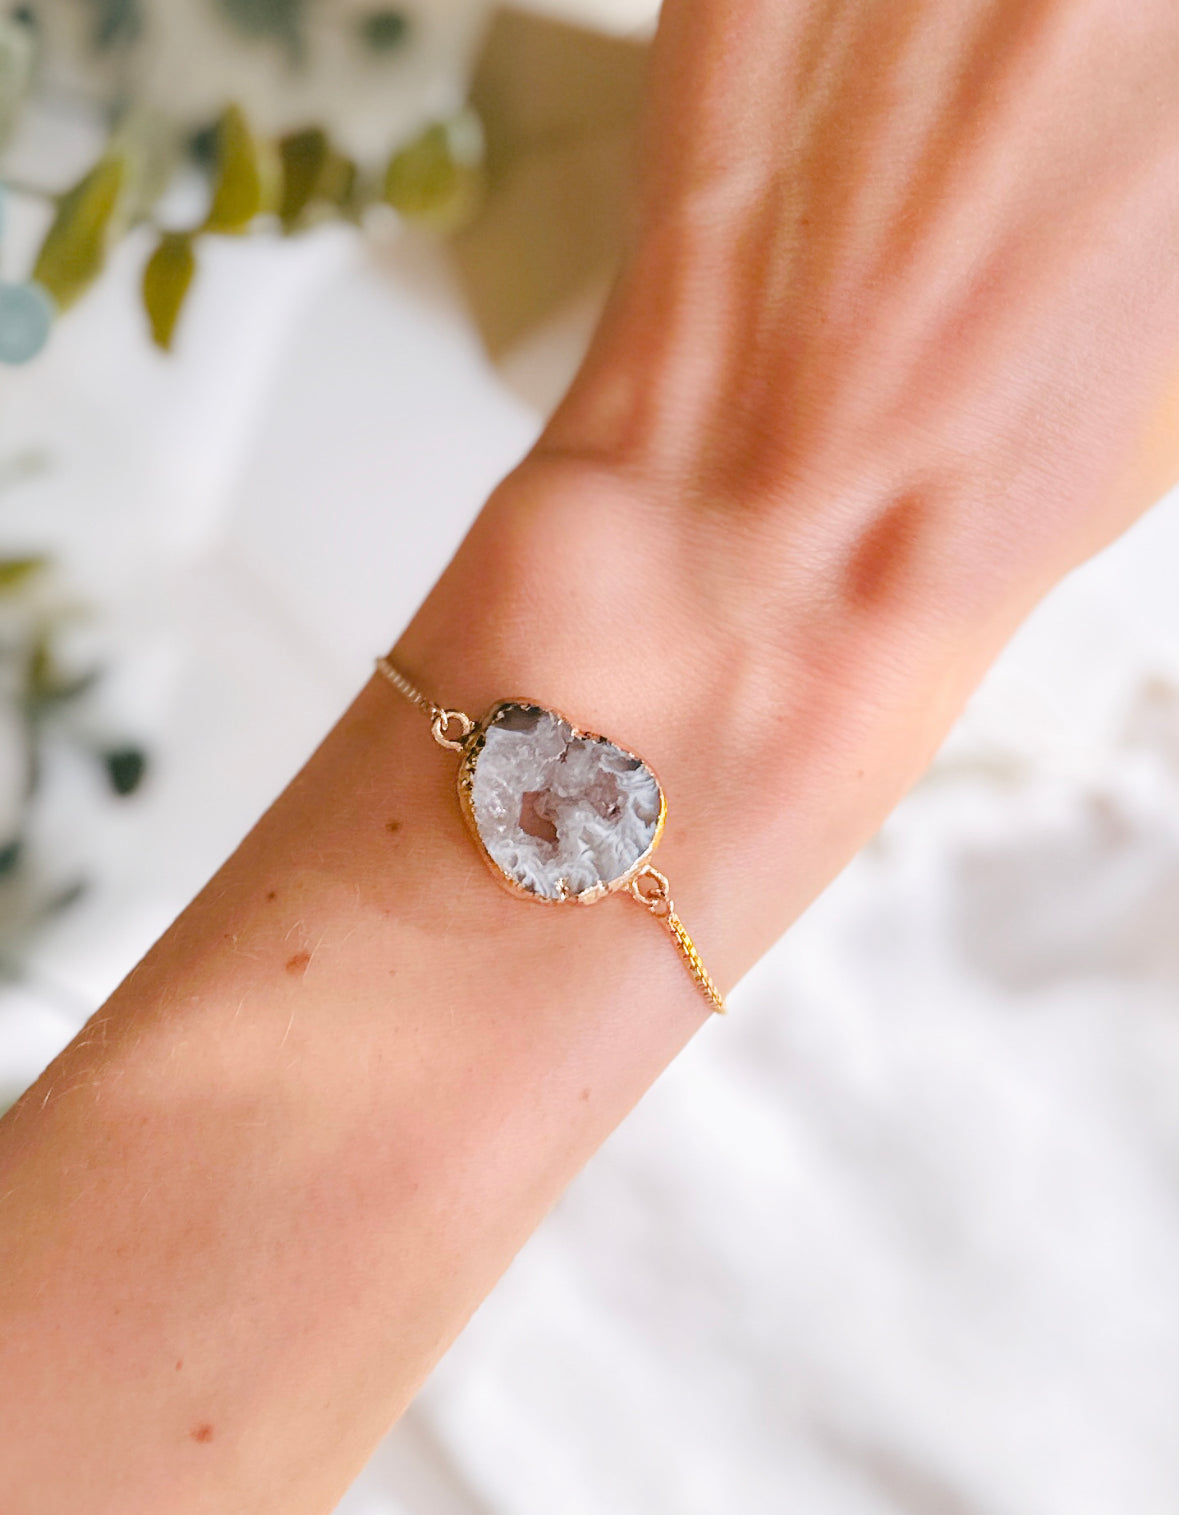 The Gold Agate Geode Minimalist